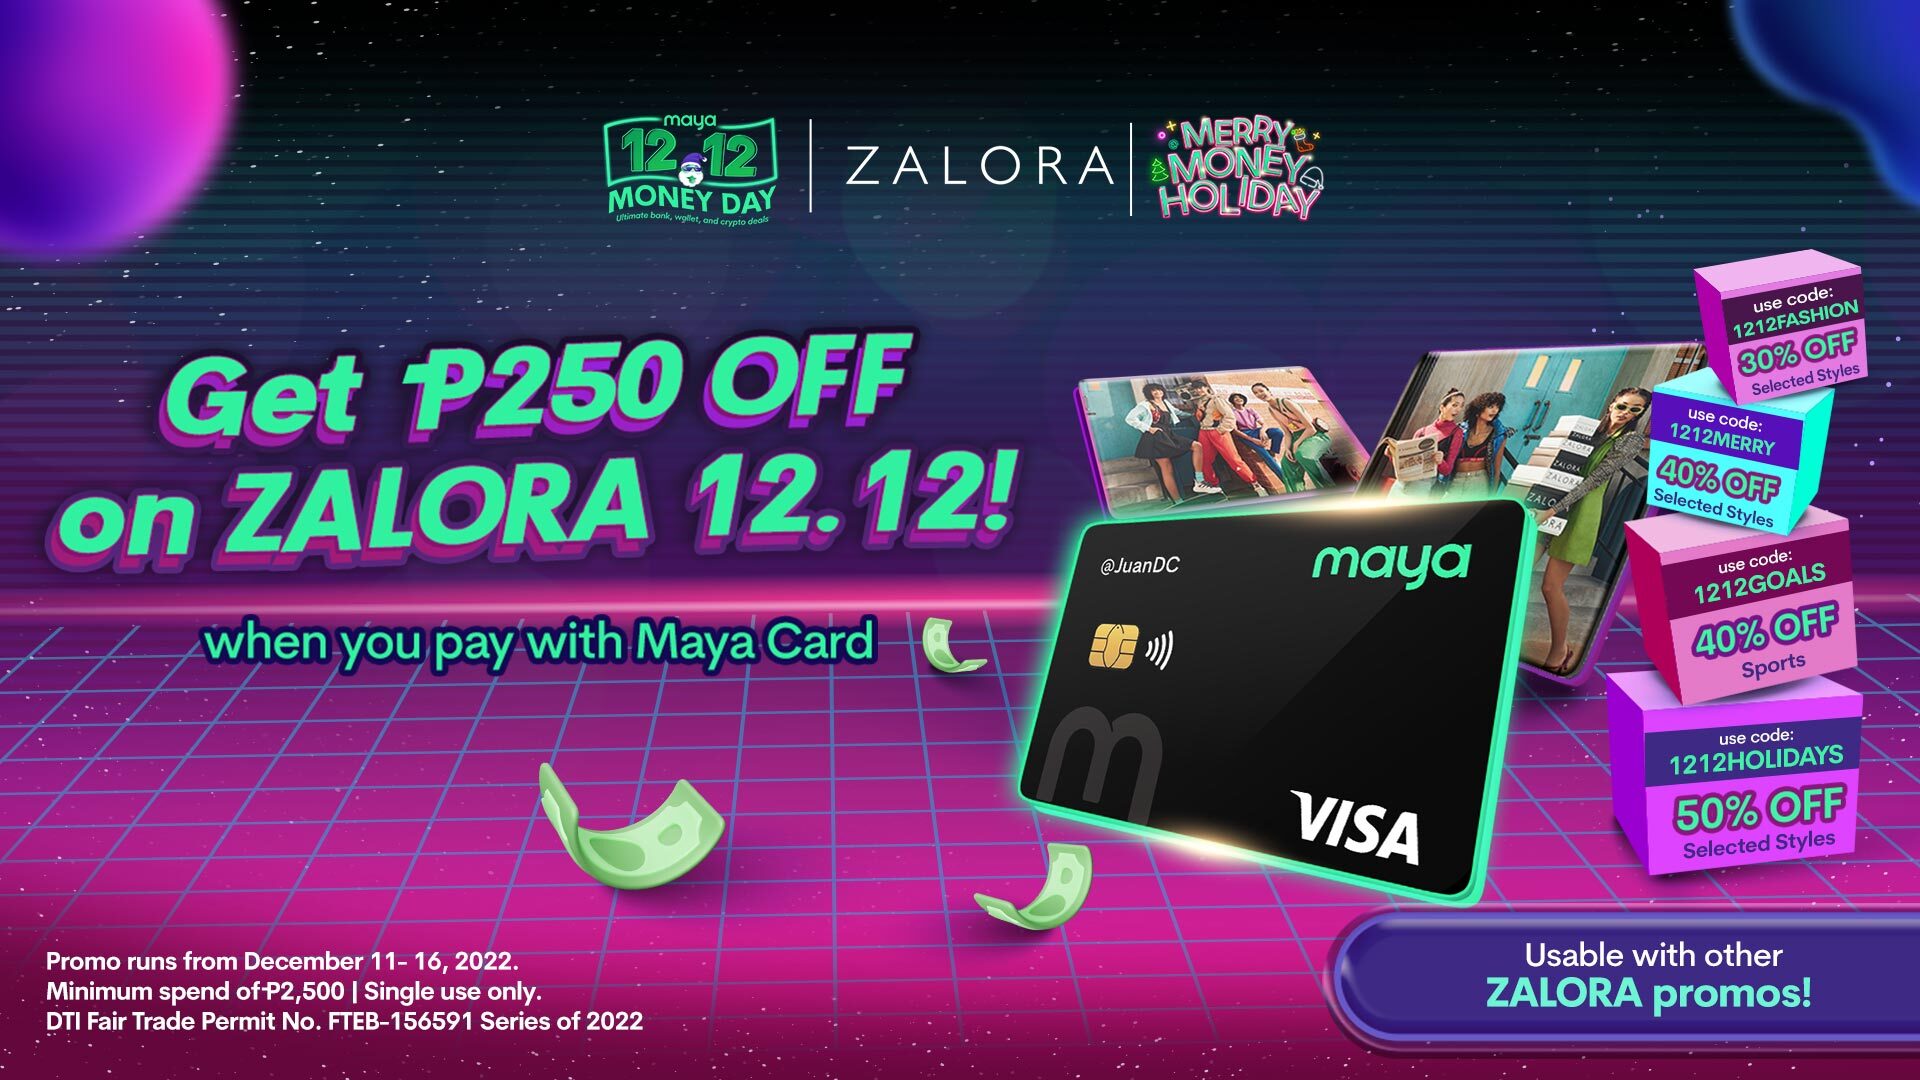 Get P250 OFF on Zalora 12.12 with your Maya Card!